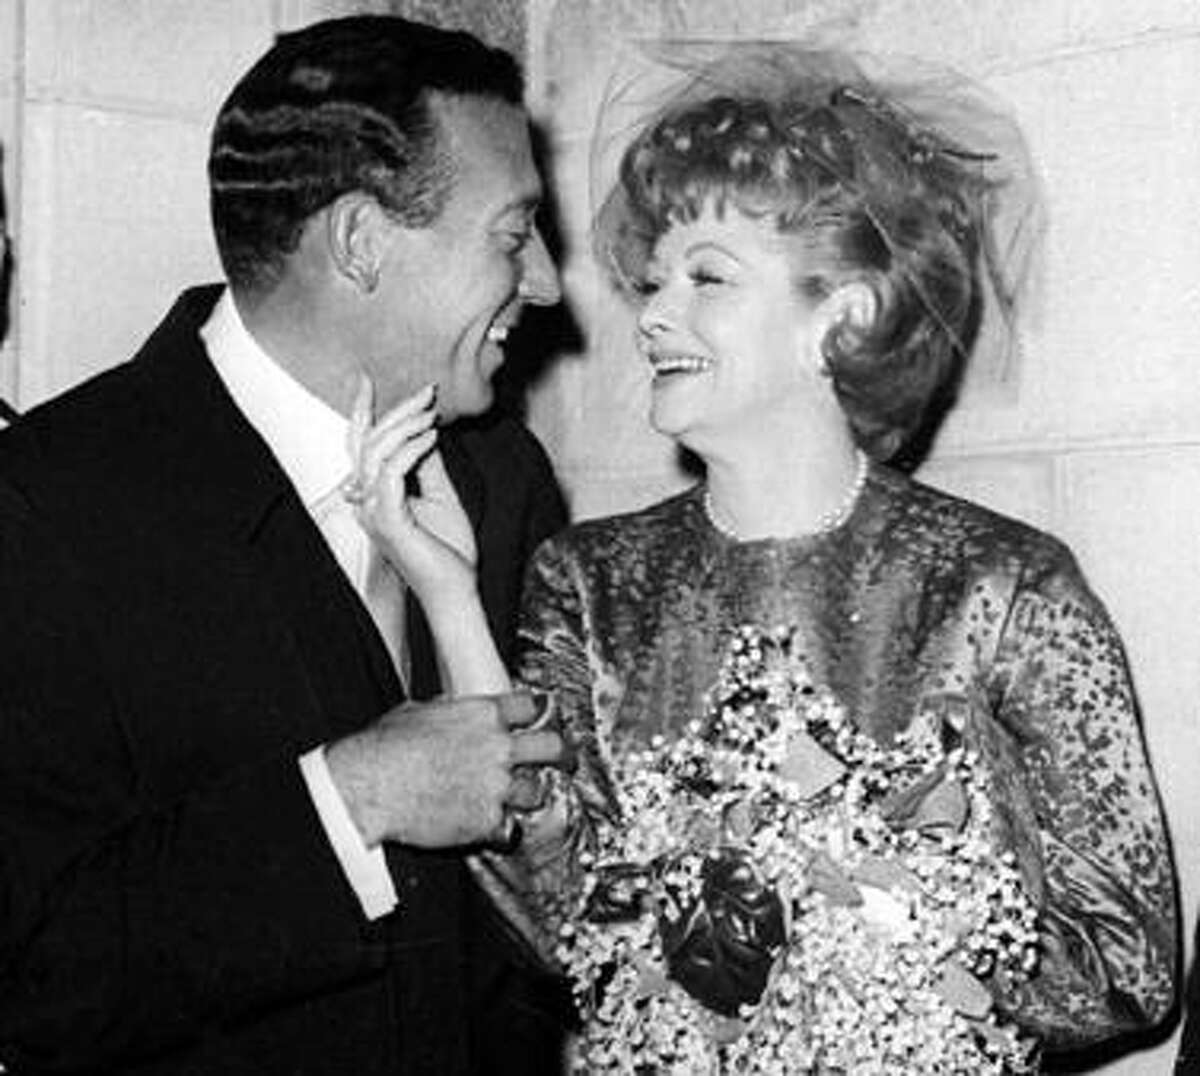 FILE - In this Nov. 20, 1961 file photo, Gary Morton, left, and Lucille Ball pose after their wedding at the Marble Collegiate Church in New York. (AP Photo, file)